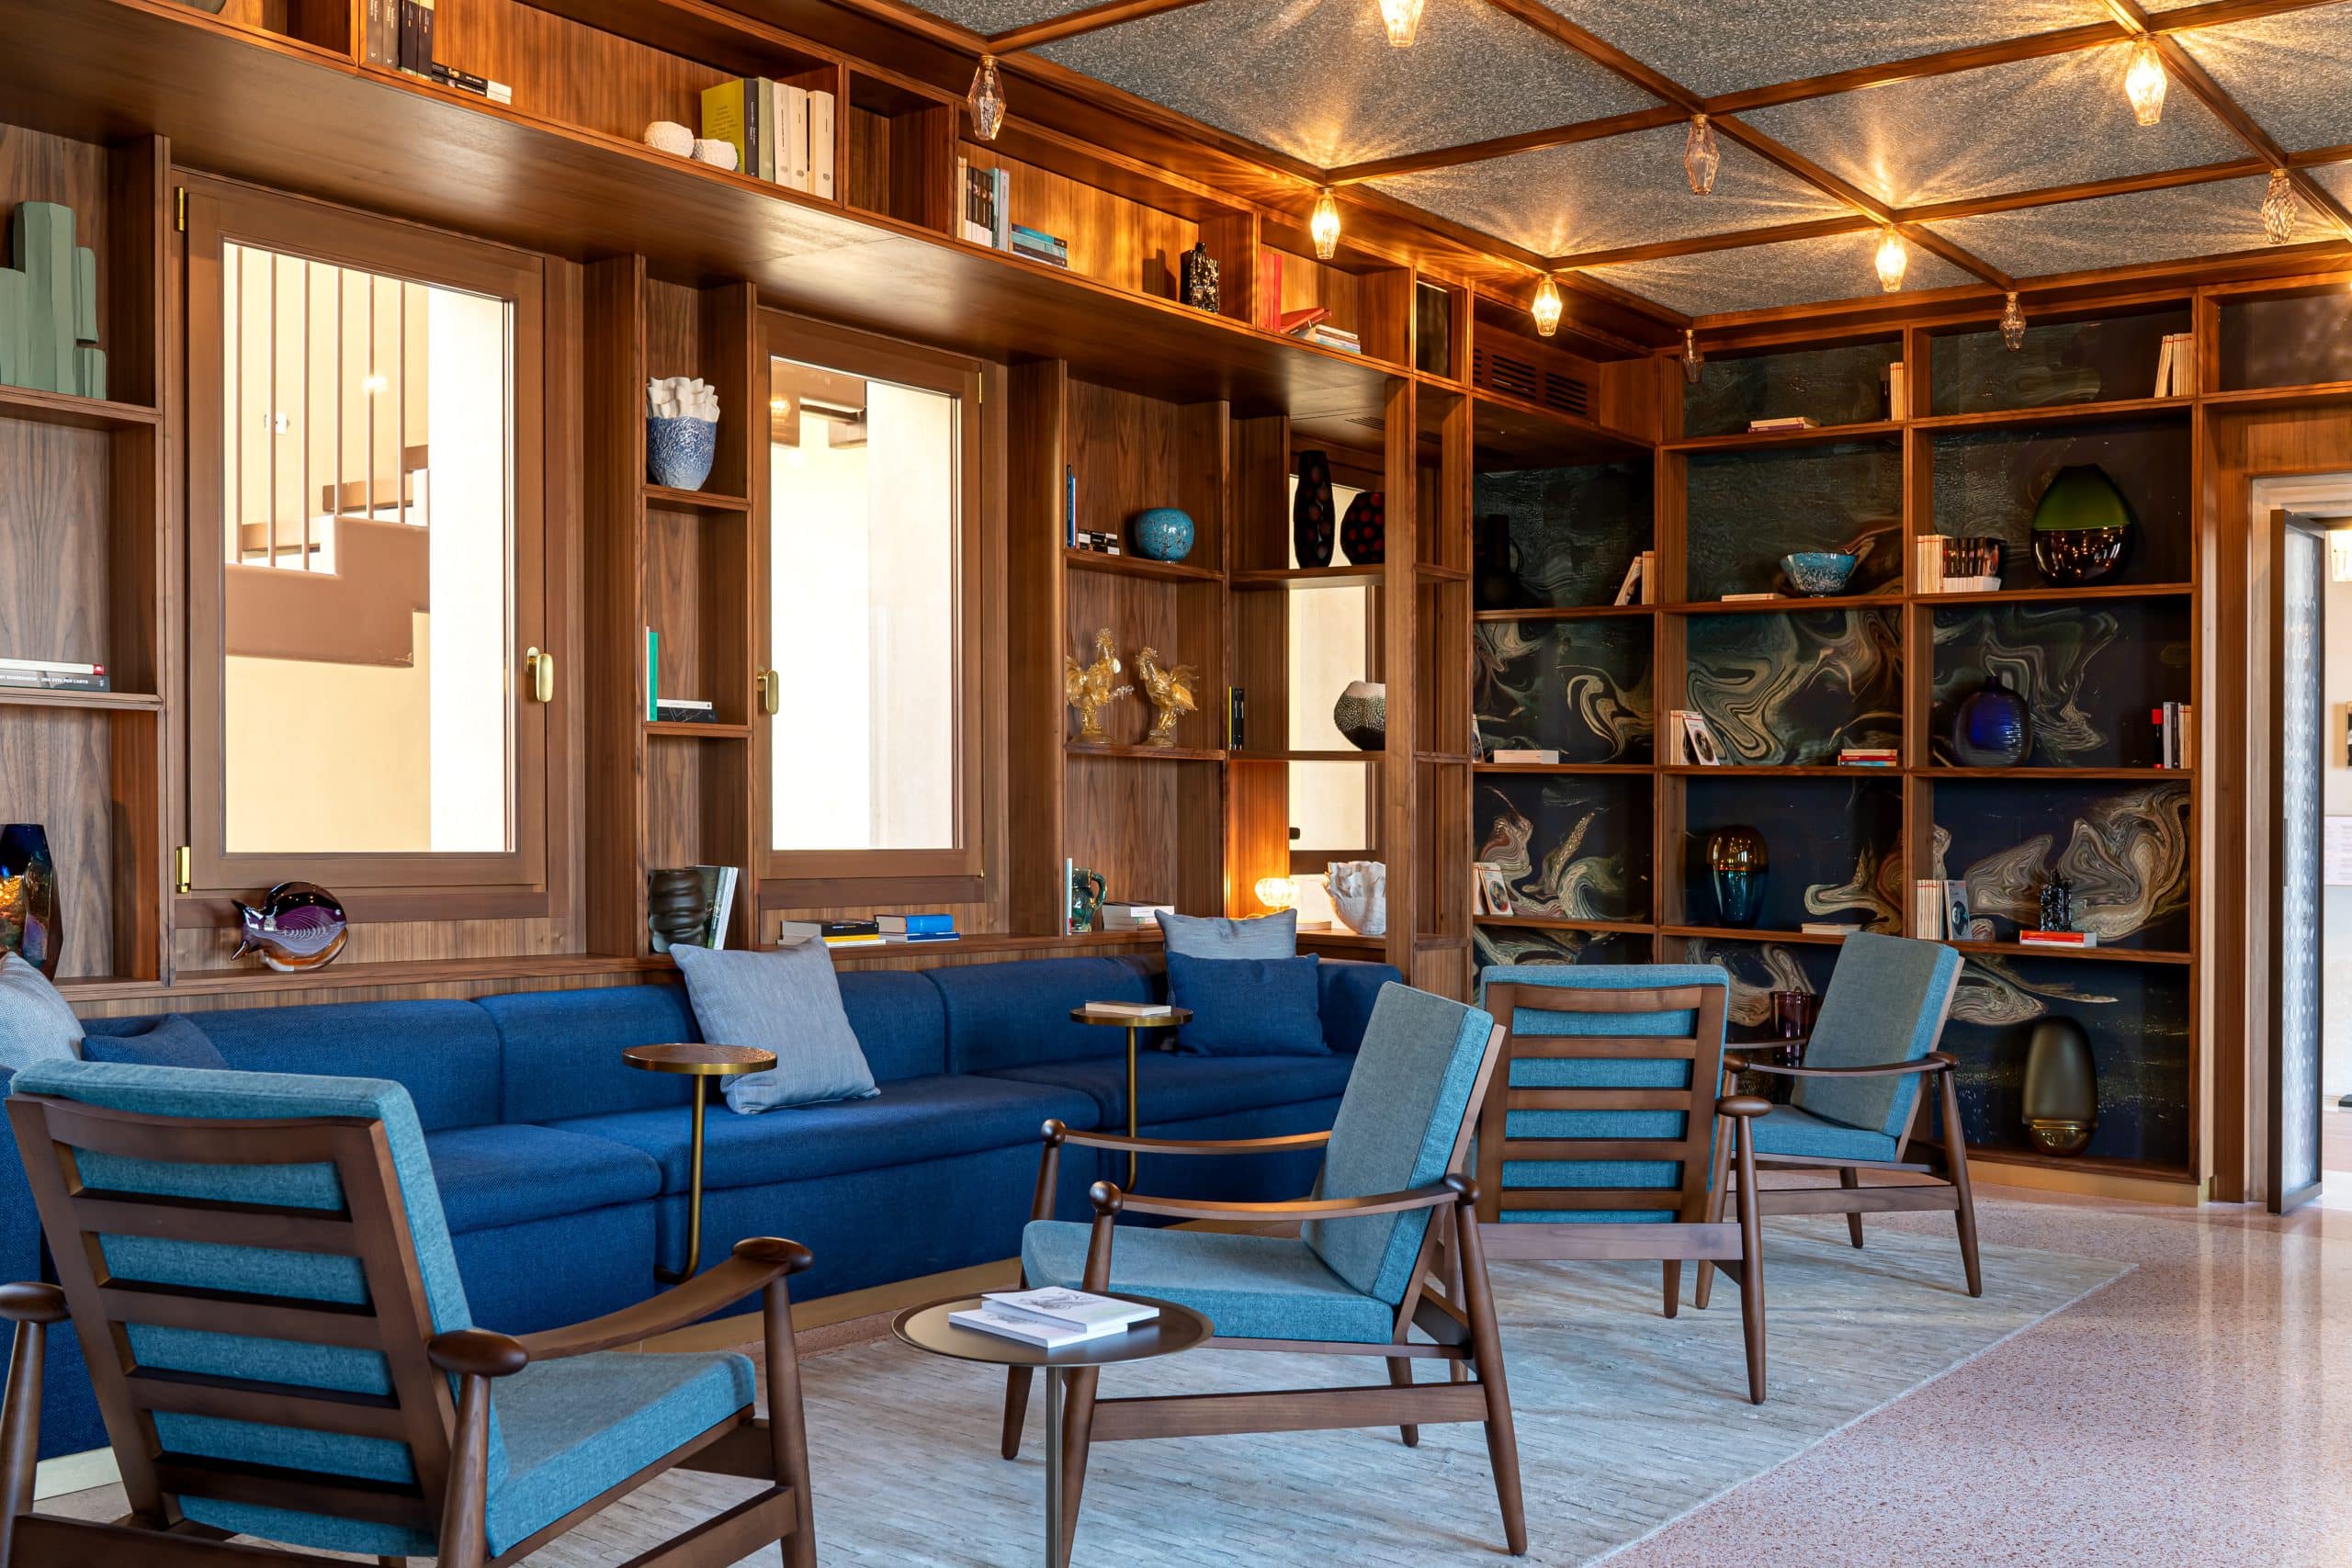 Venice's new Ca' di Dio hotel reading room in shades of blue with marbleized paper backing bookshelves. Hotel architecture and interior design by Patricia Urquiola